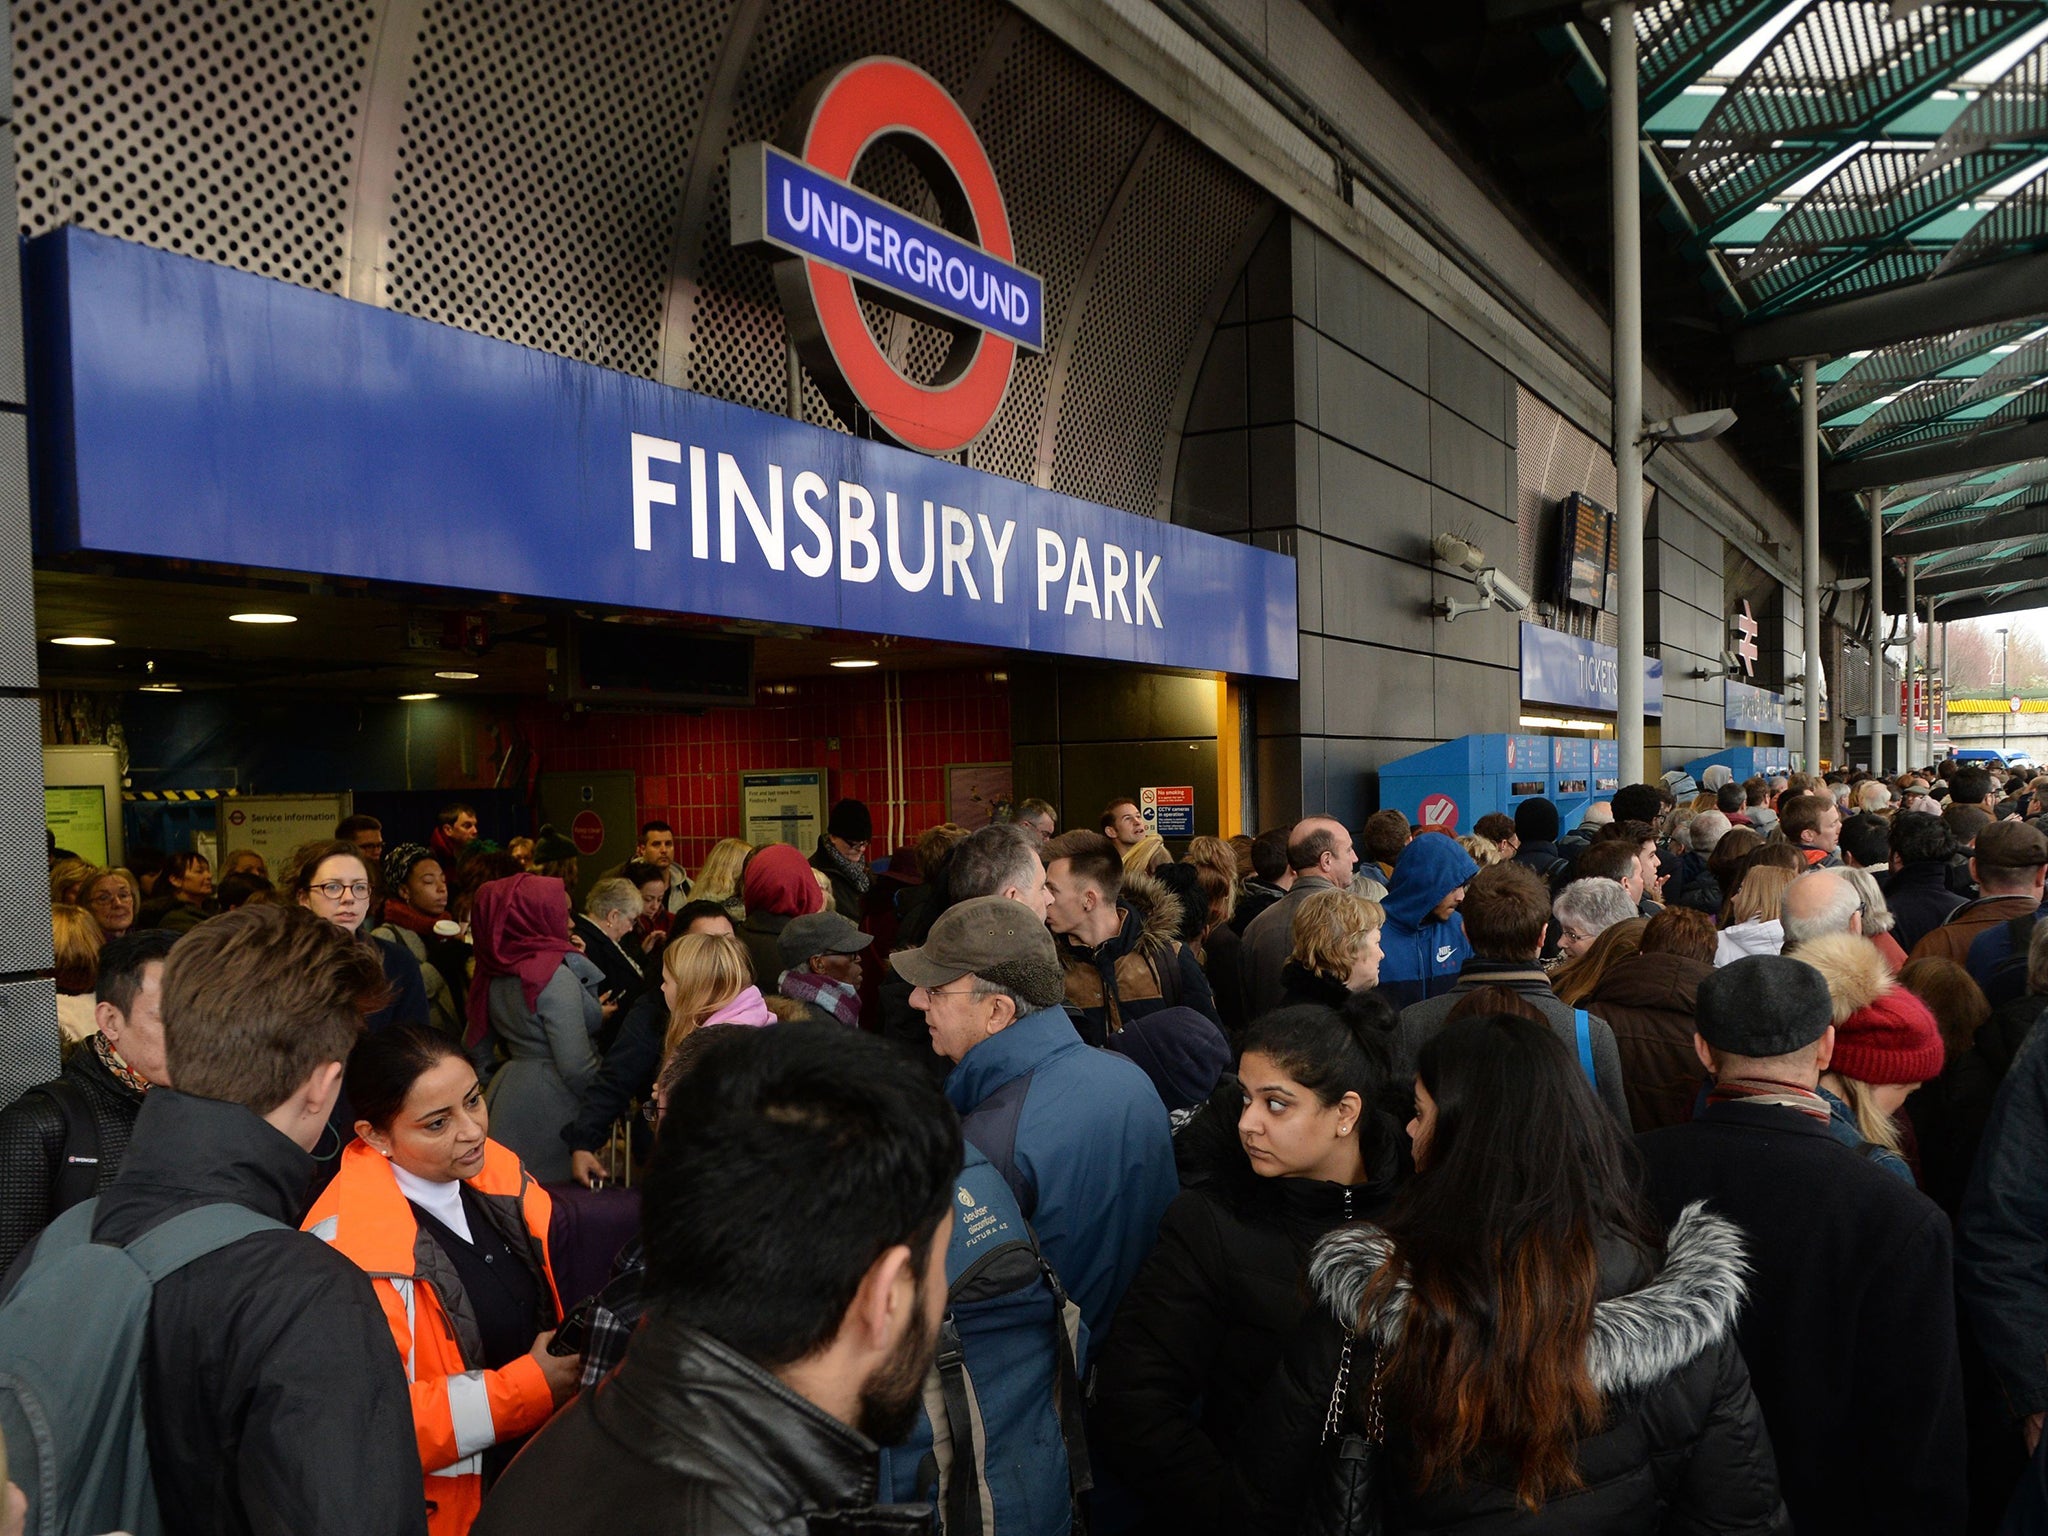 Travellers are locked out of Finsbury Park station, London, where they were directed to go as trains in and out of King's Cross have been cancelled